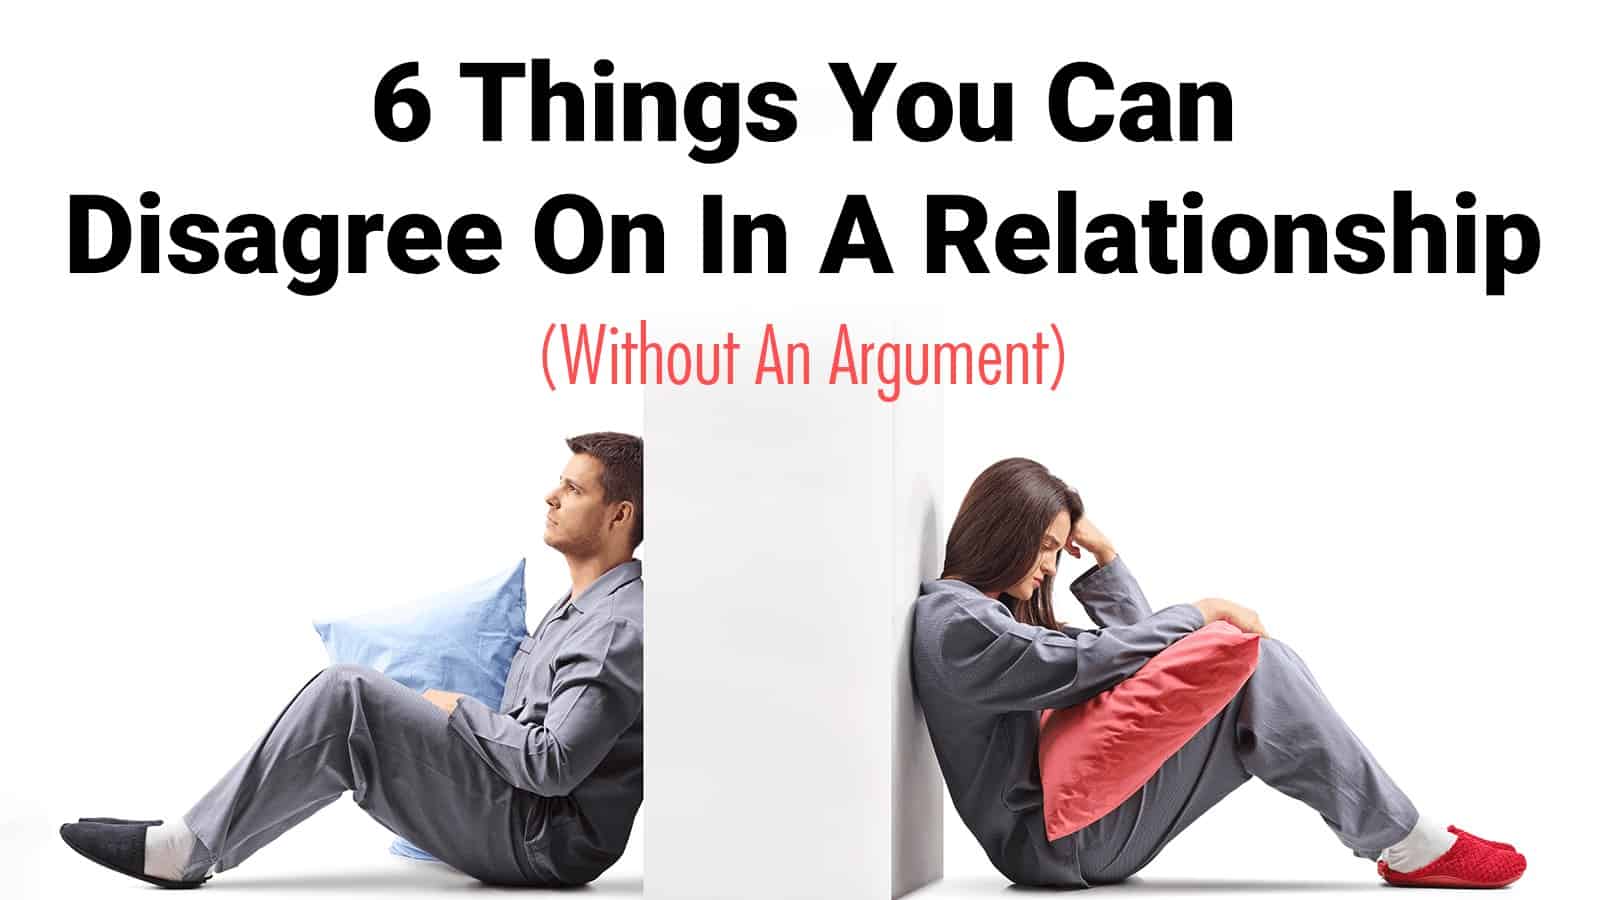 6 Things You Can Disagree On In A Relationship (Without An Argument)